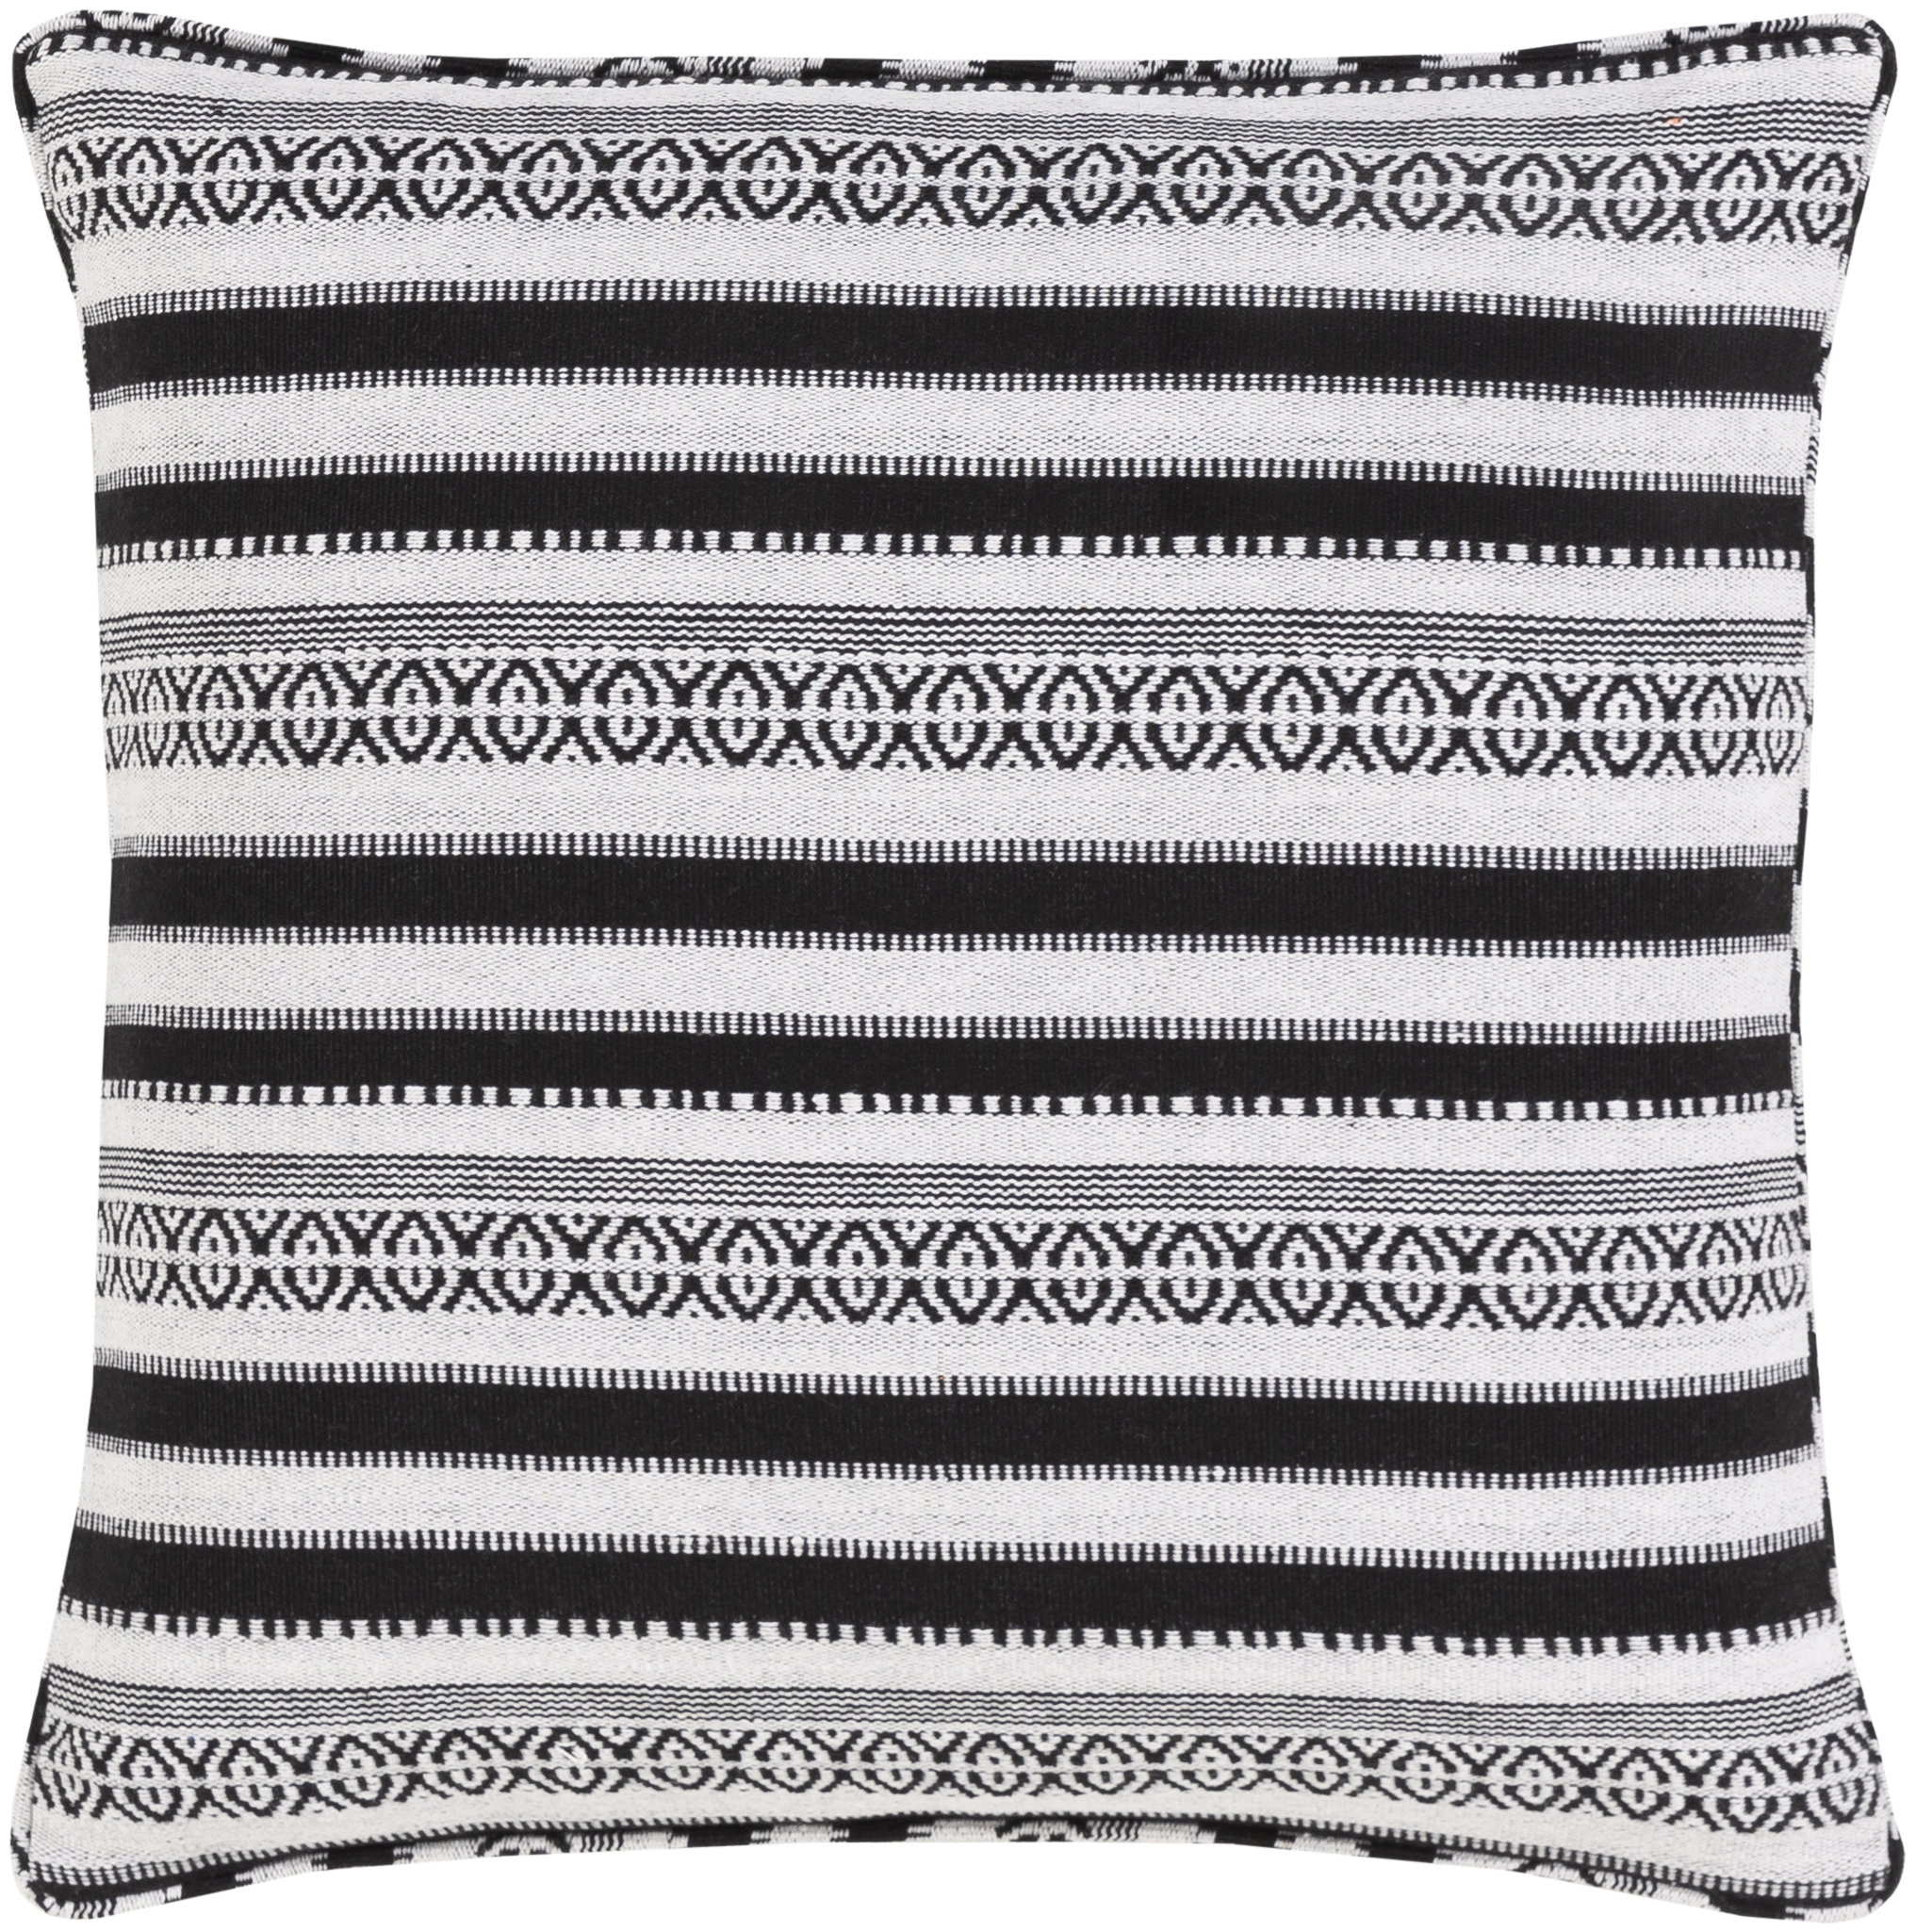 Maya - MYP-001 - 18" x 18" - pillow cover only - Image 0